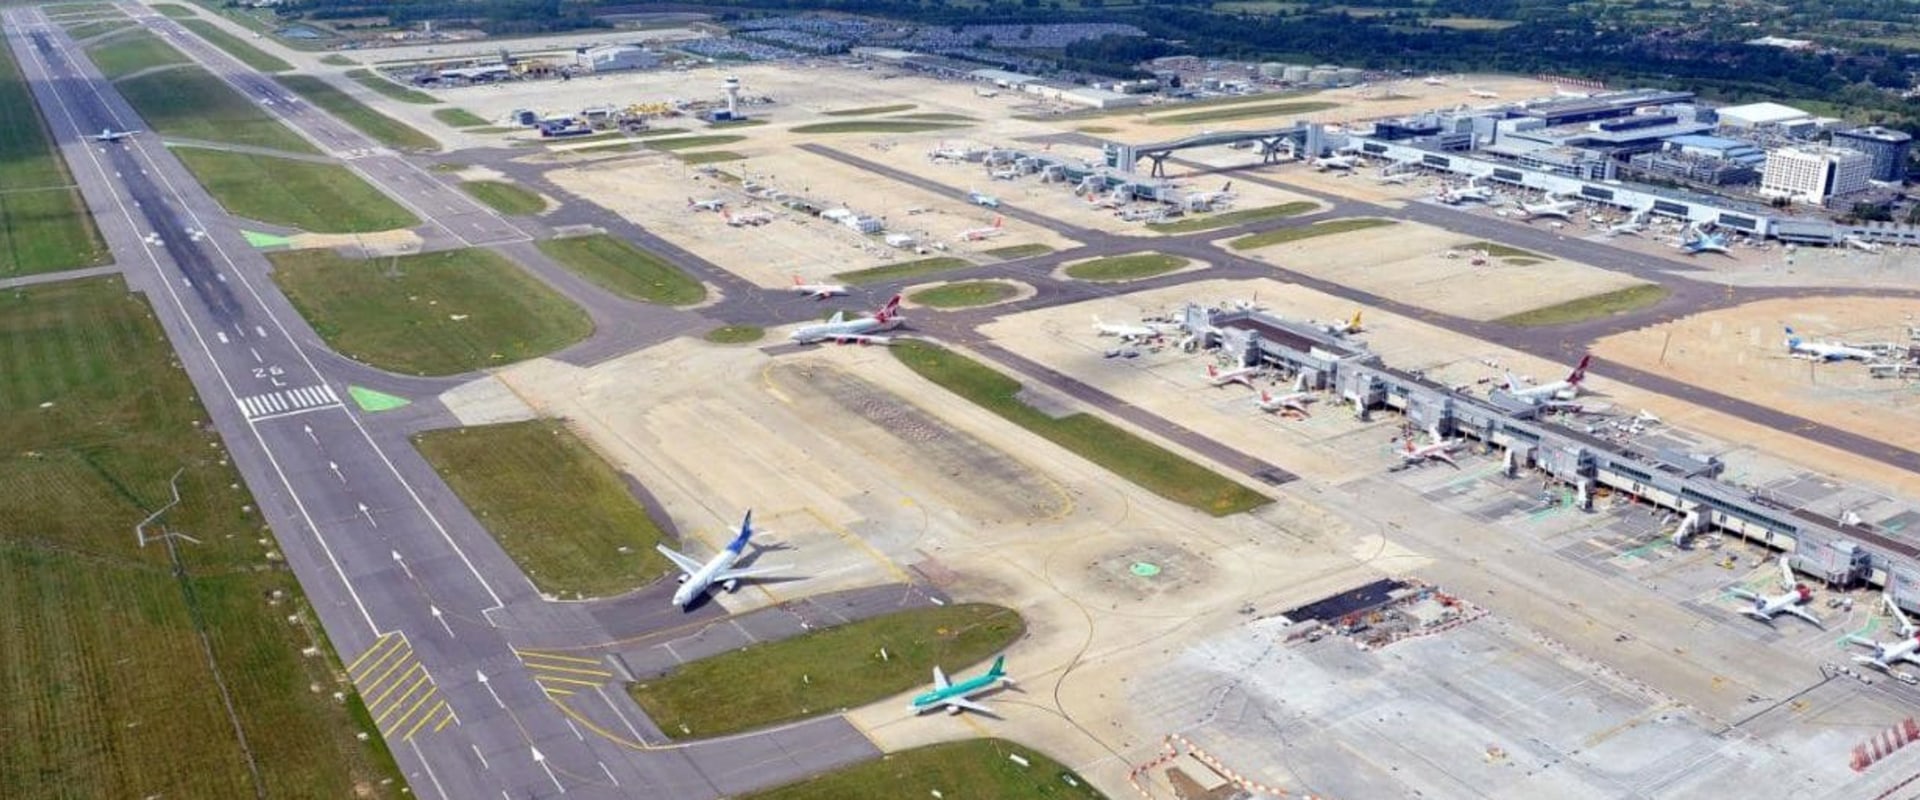 Gatwick Airport: A Comprehensive Overview